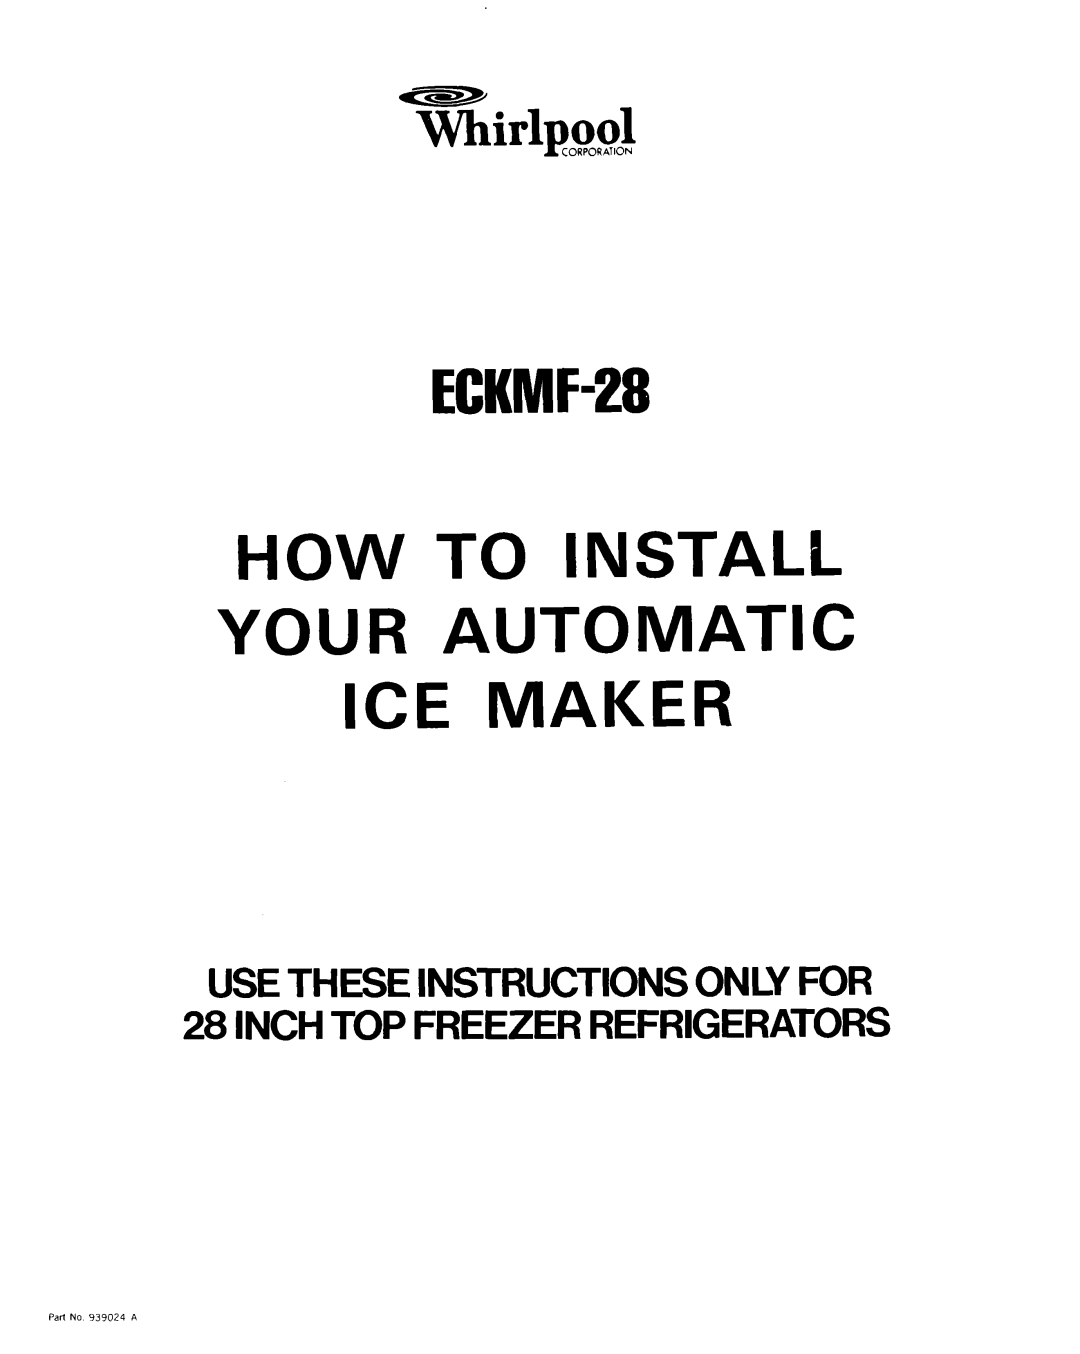 Whirlpool manual TKirlpool, ECKMF-28 HOW TO INSTALL YOUR AUTOMATIC ICE MAKER, Corporation, Part No 939024 A 